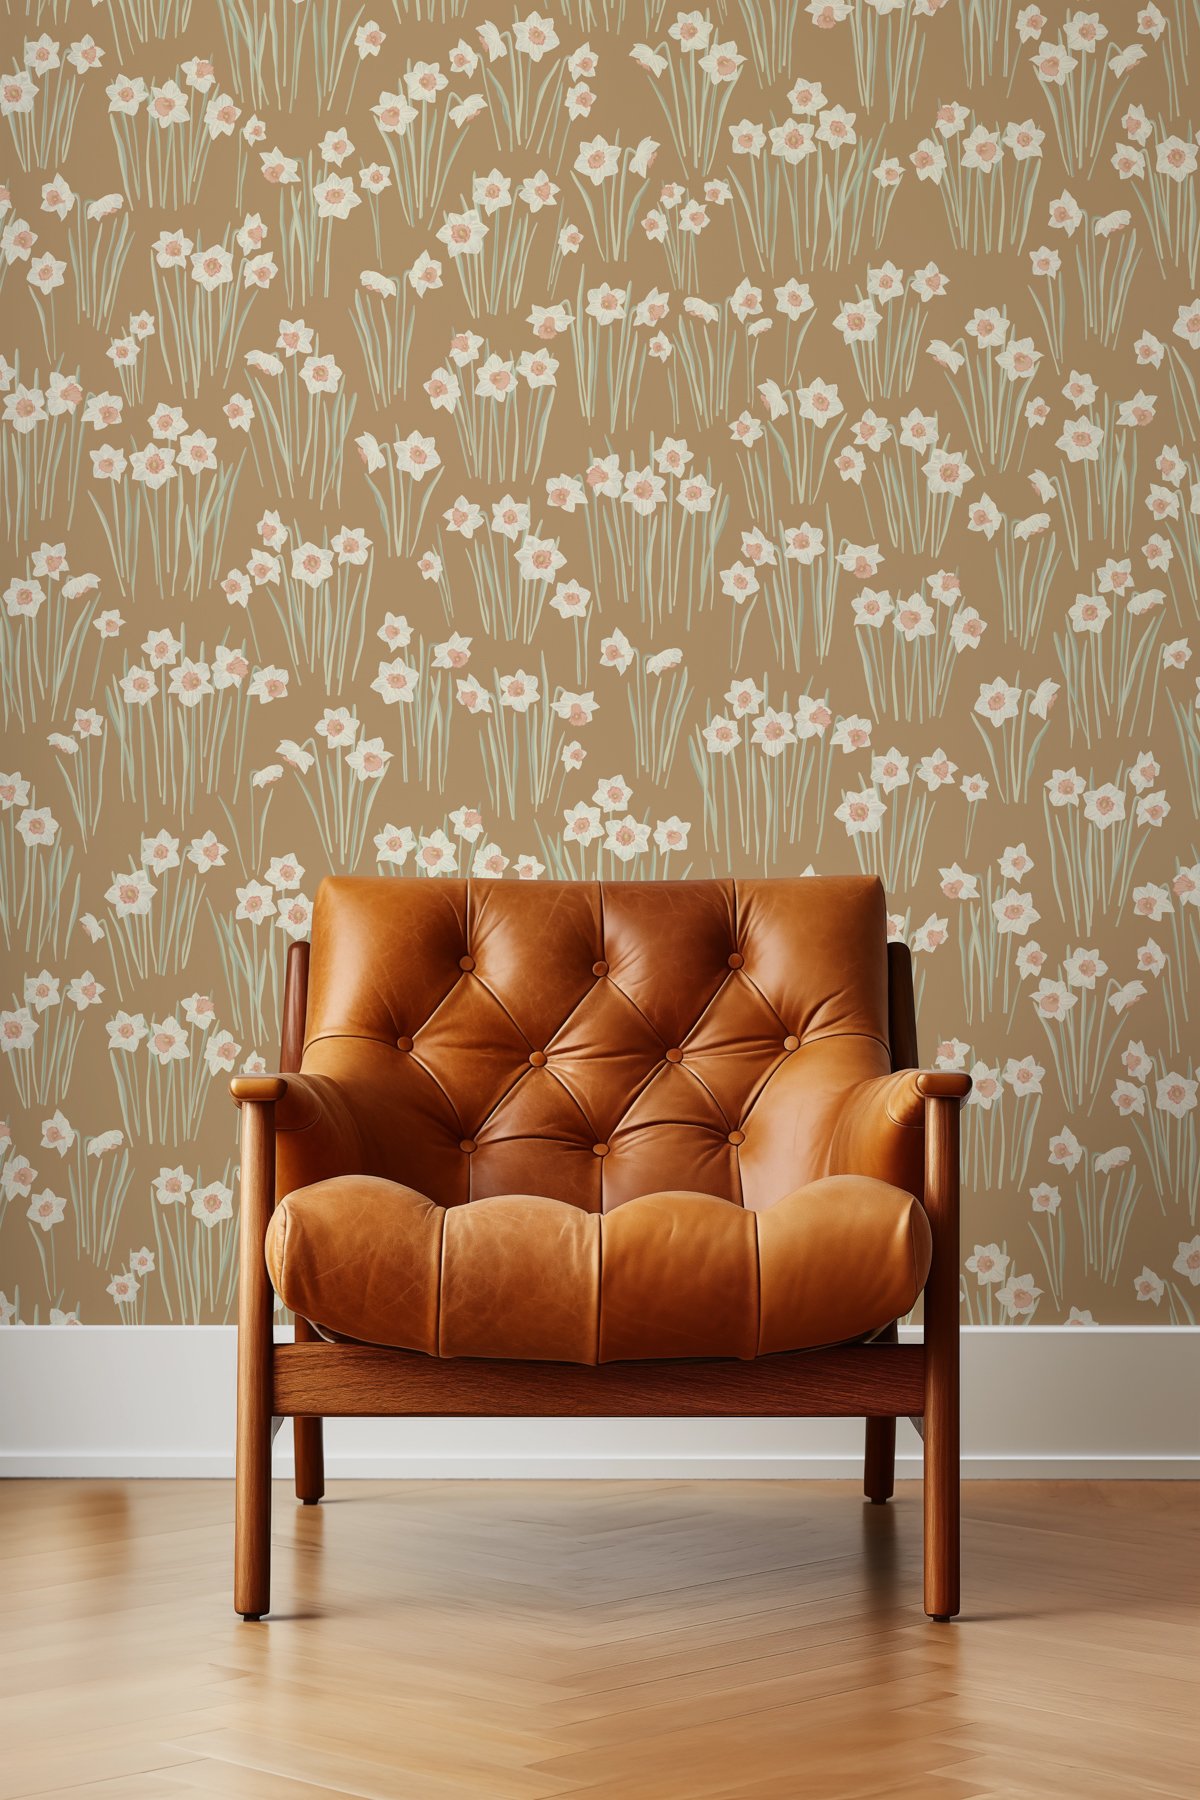 Kate Golding Daffodil (Saddle Brown) Wallpaper.  Modern wallcoverings and interior decor.  